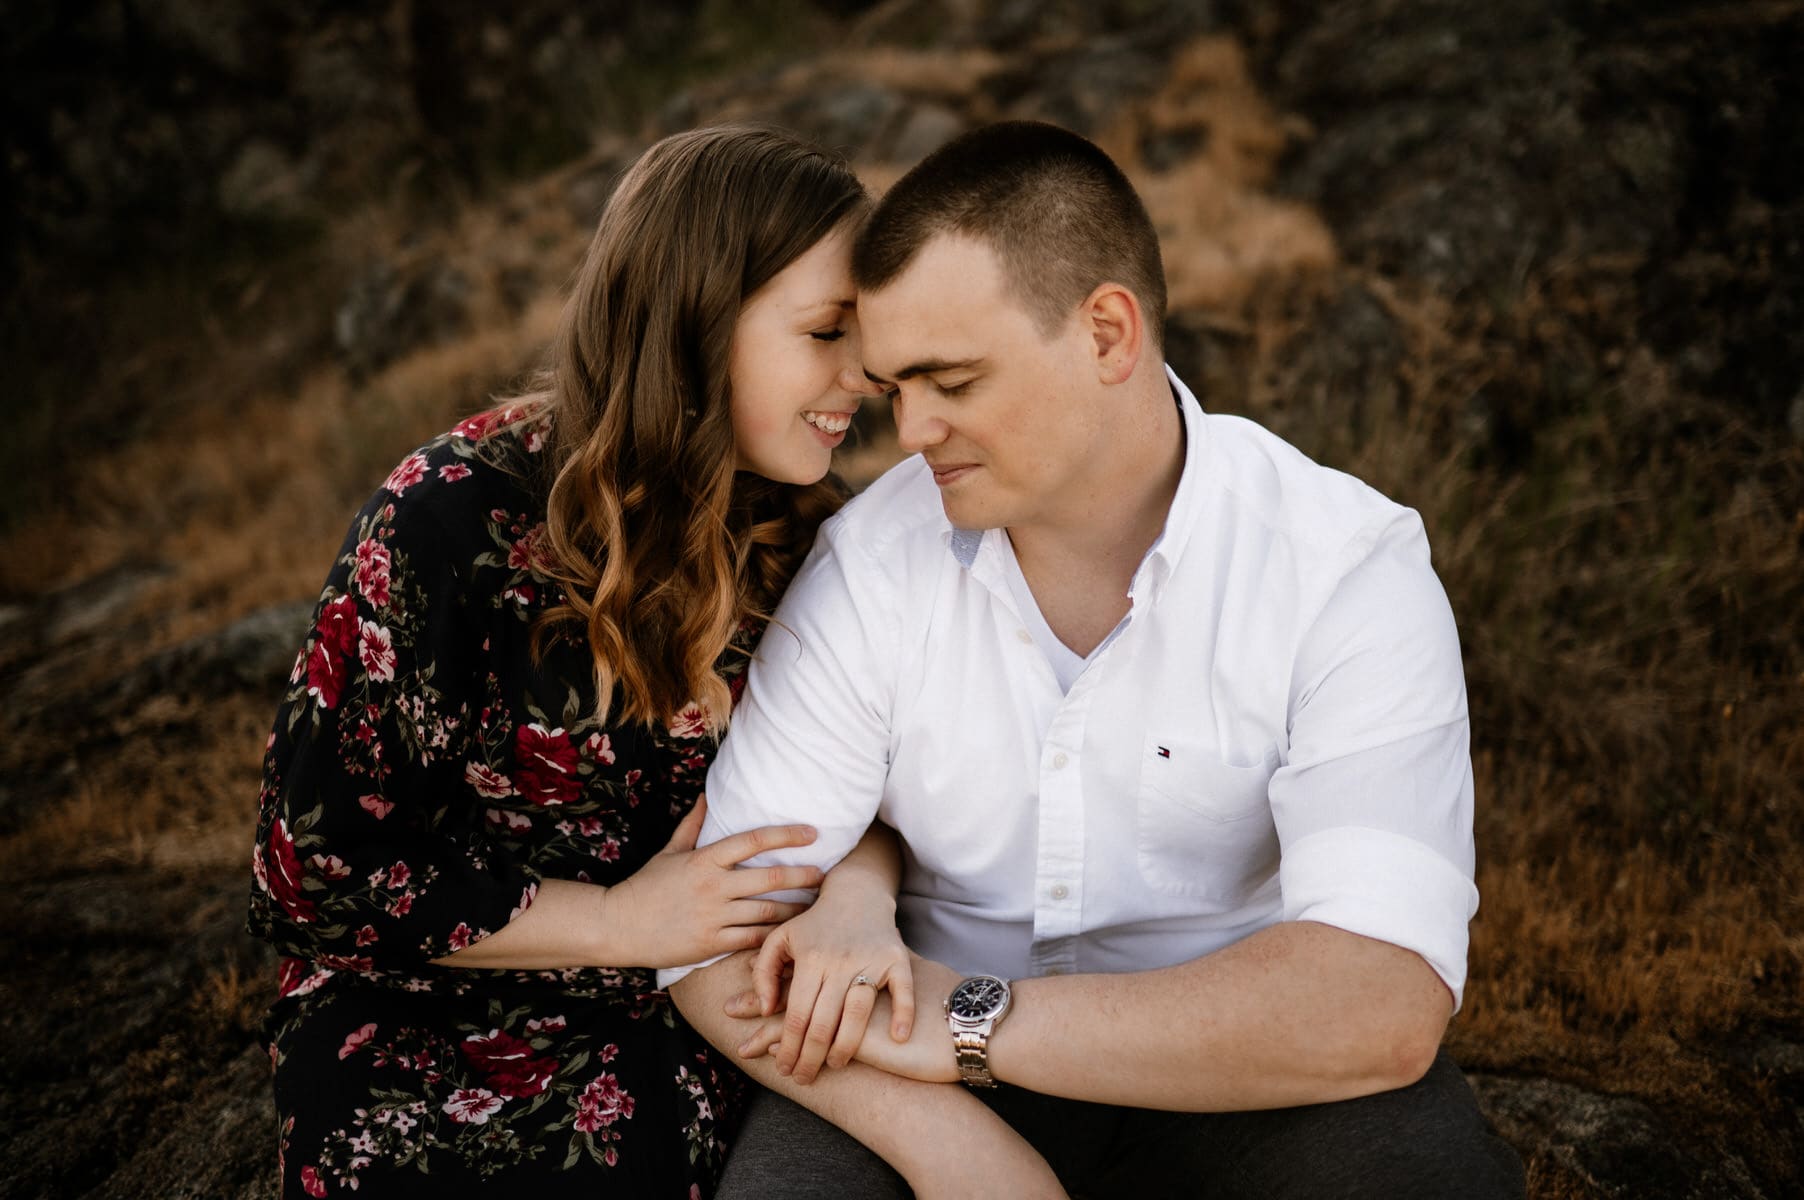 Engagement Photography Victoria BC Professional Photographer-1